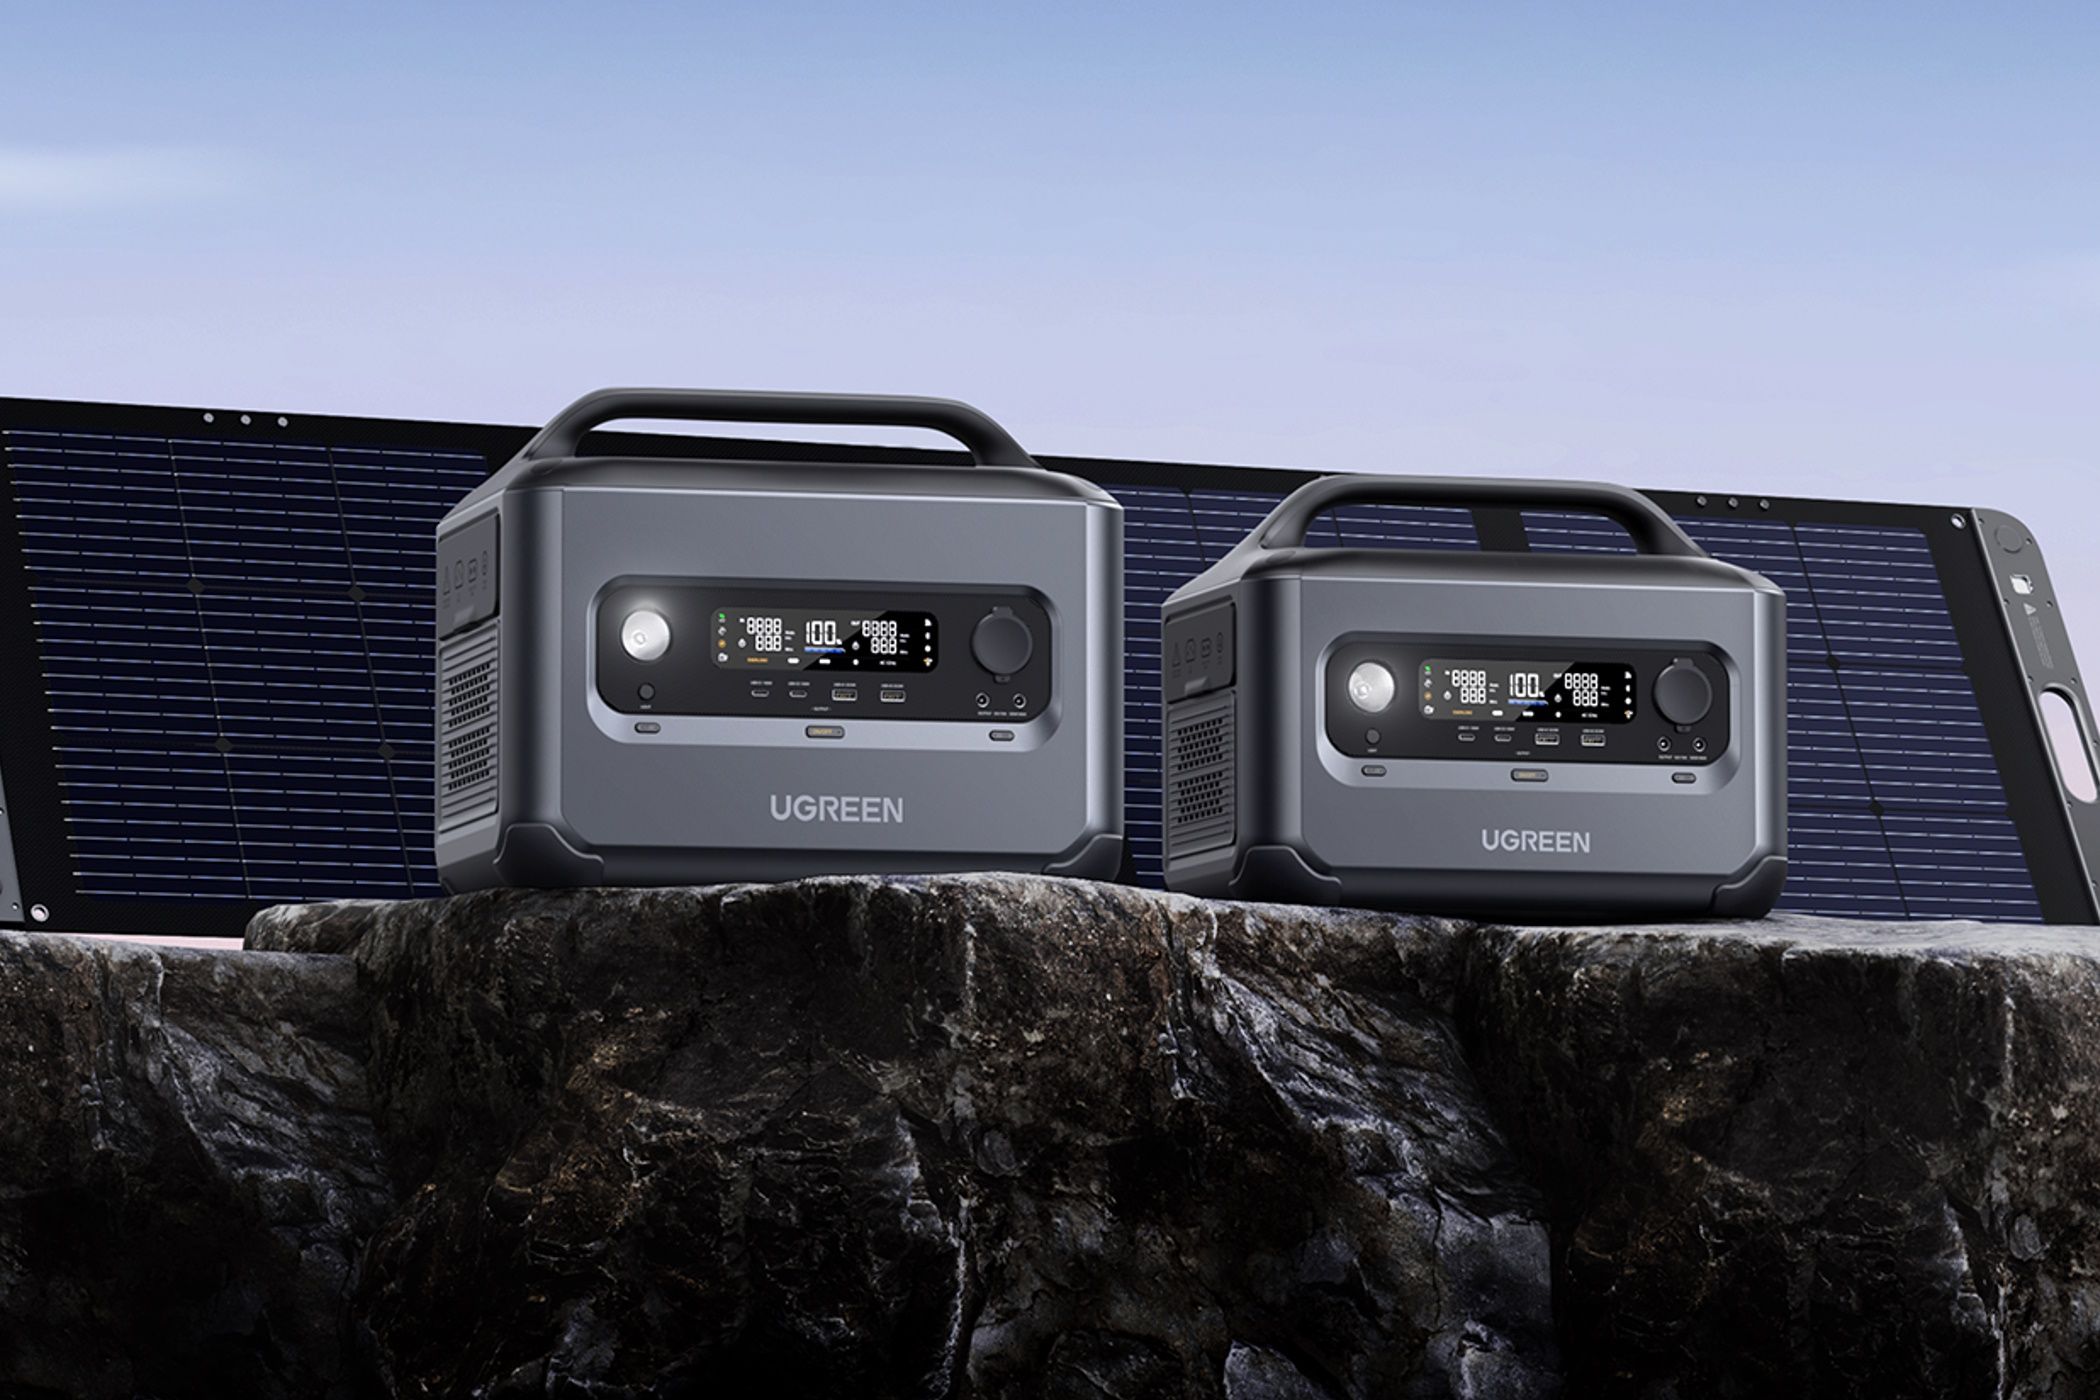 powerroam 1200 on rock outdoors with solar panels behind